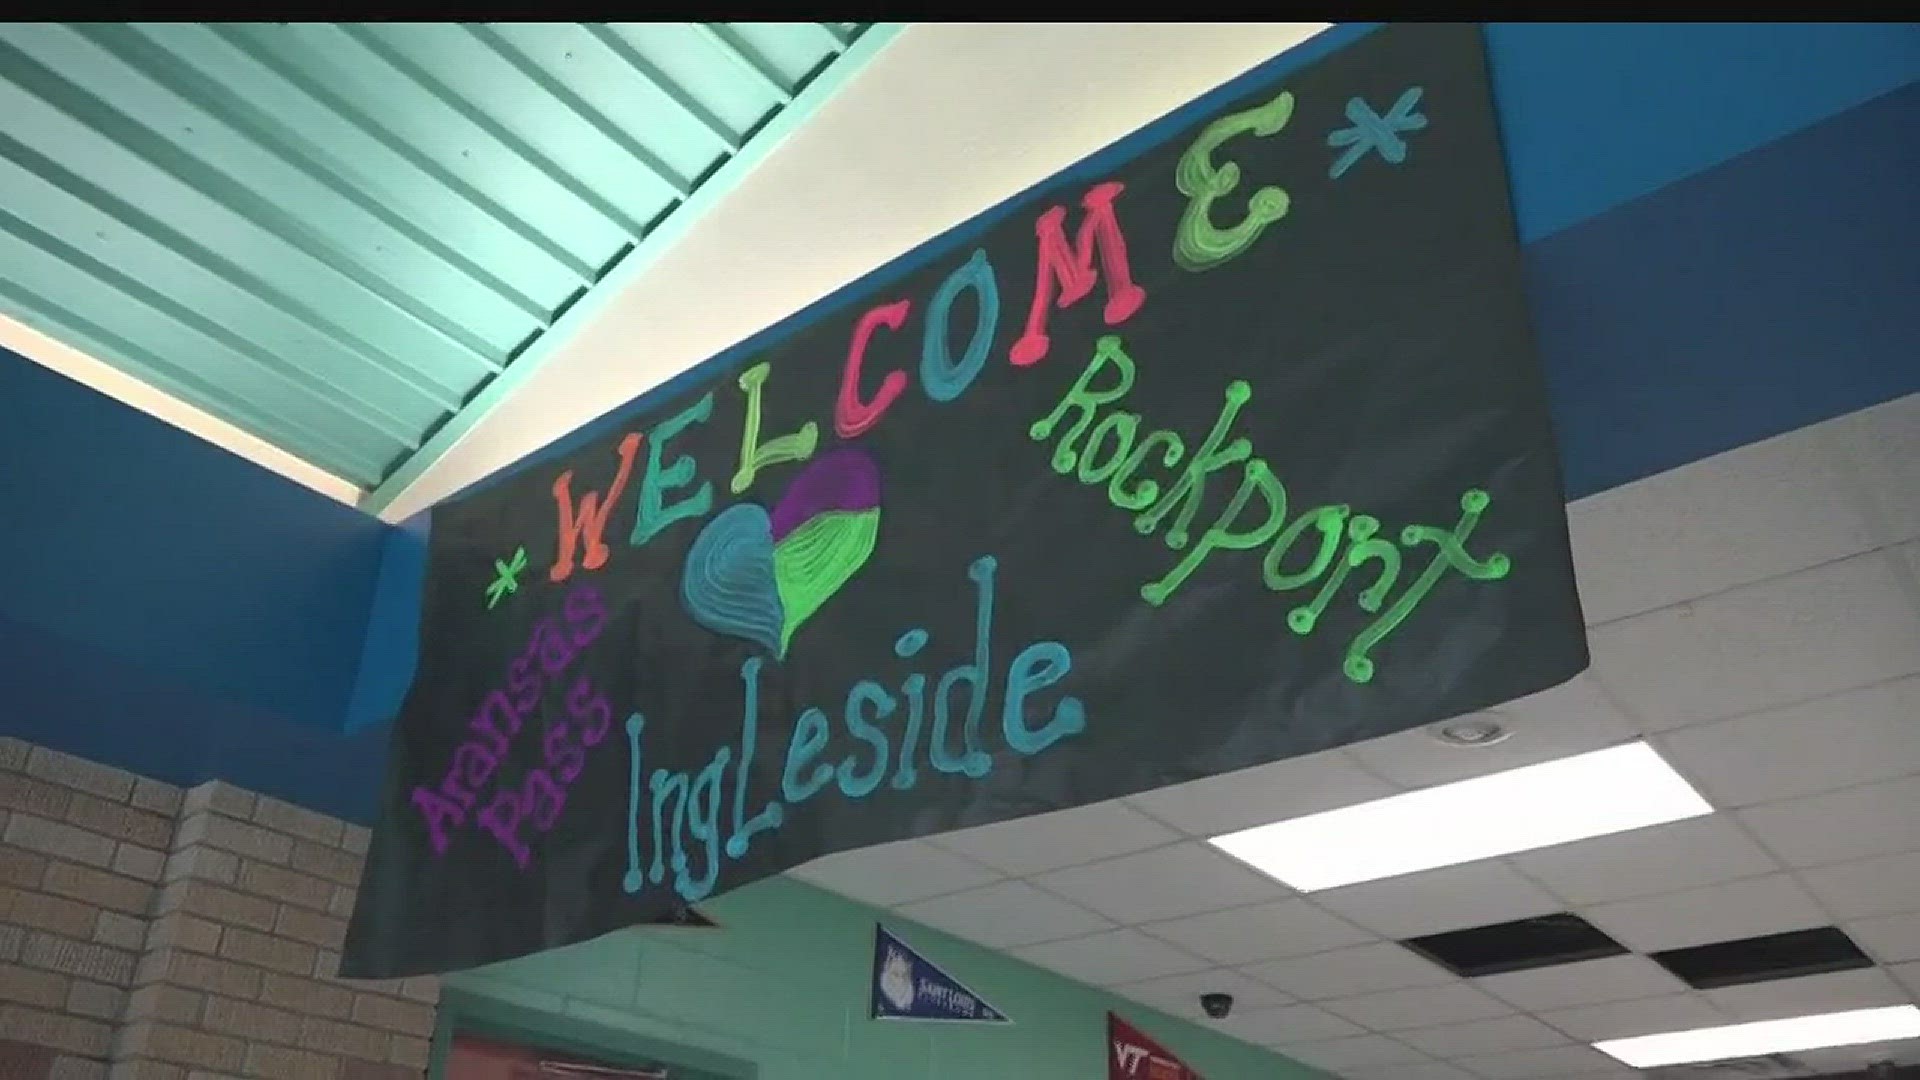 Students in Ingleside returned back to school on Tuesday following the devastation brought by Hurricane Harvey.